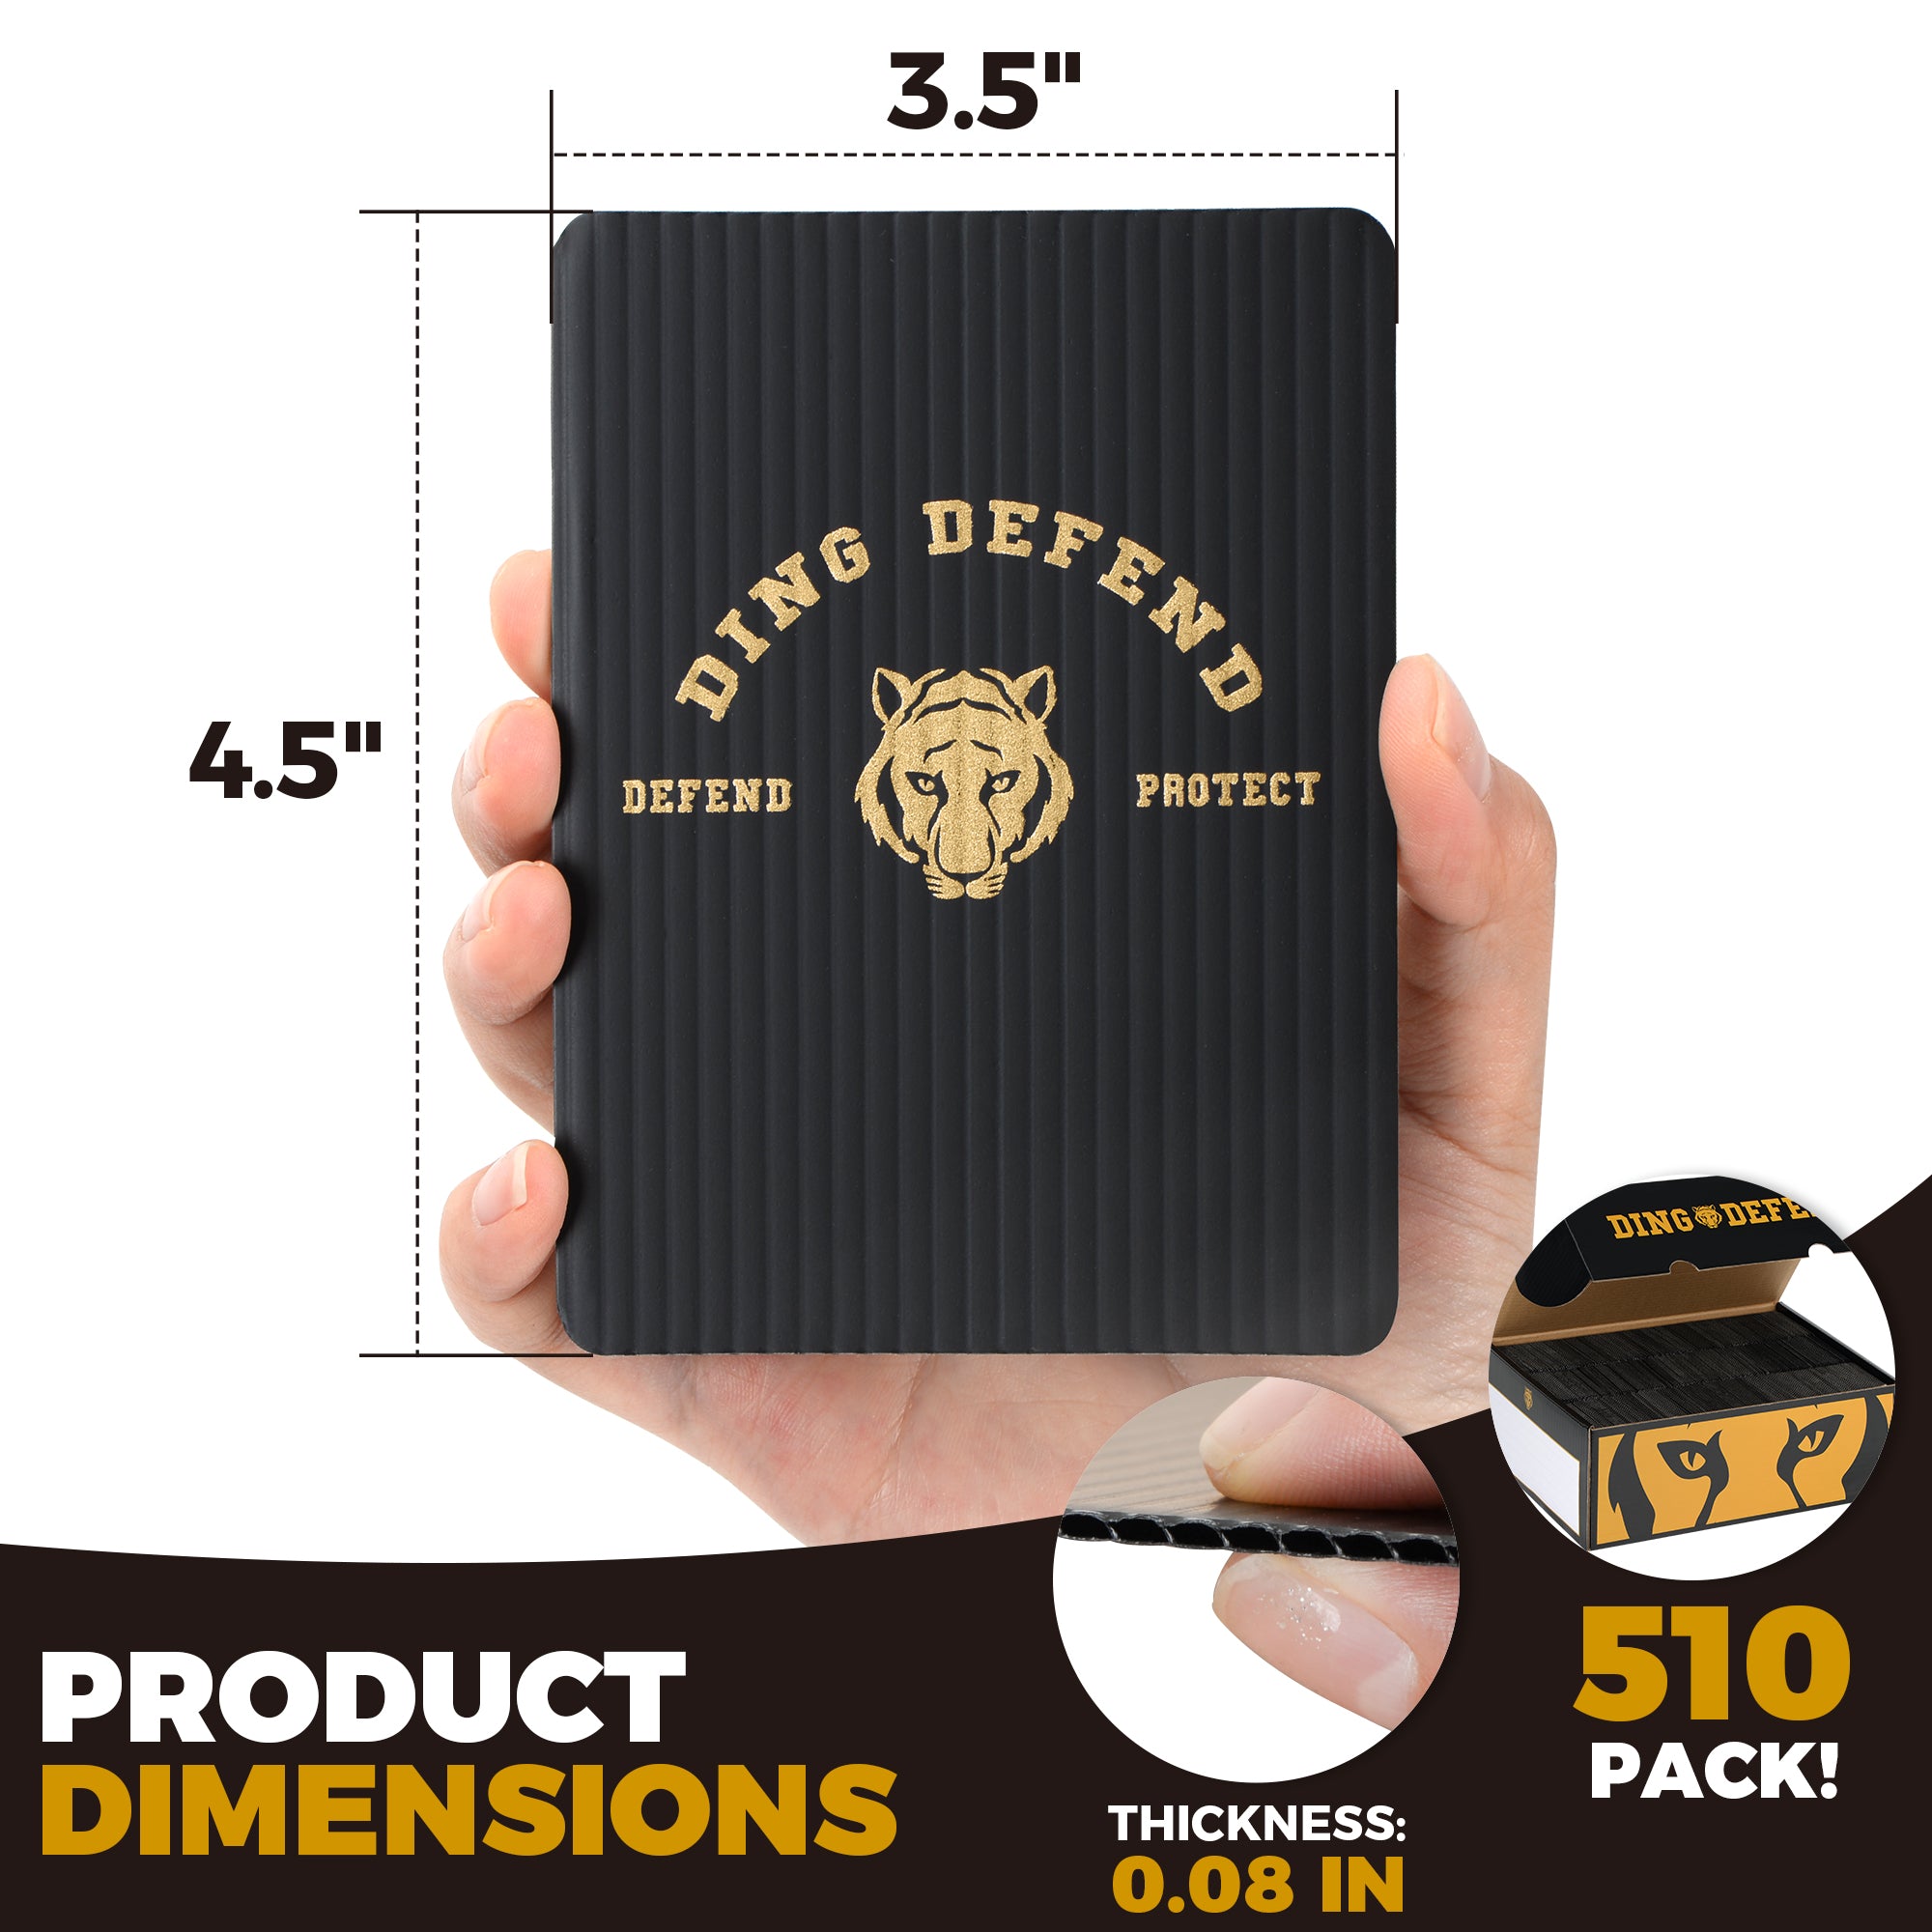 510 pack Ding Defend Trading Card Shipping Protectors Hard Plastic Card Slab - Tiger Design Card Guard for Collectible Cards, Card Mailing Supplies & Hobby Supplies - 3.5 x 4.5 Inches, Corrugated Packaging Pads